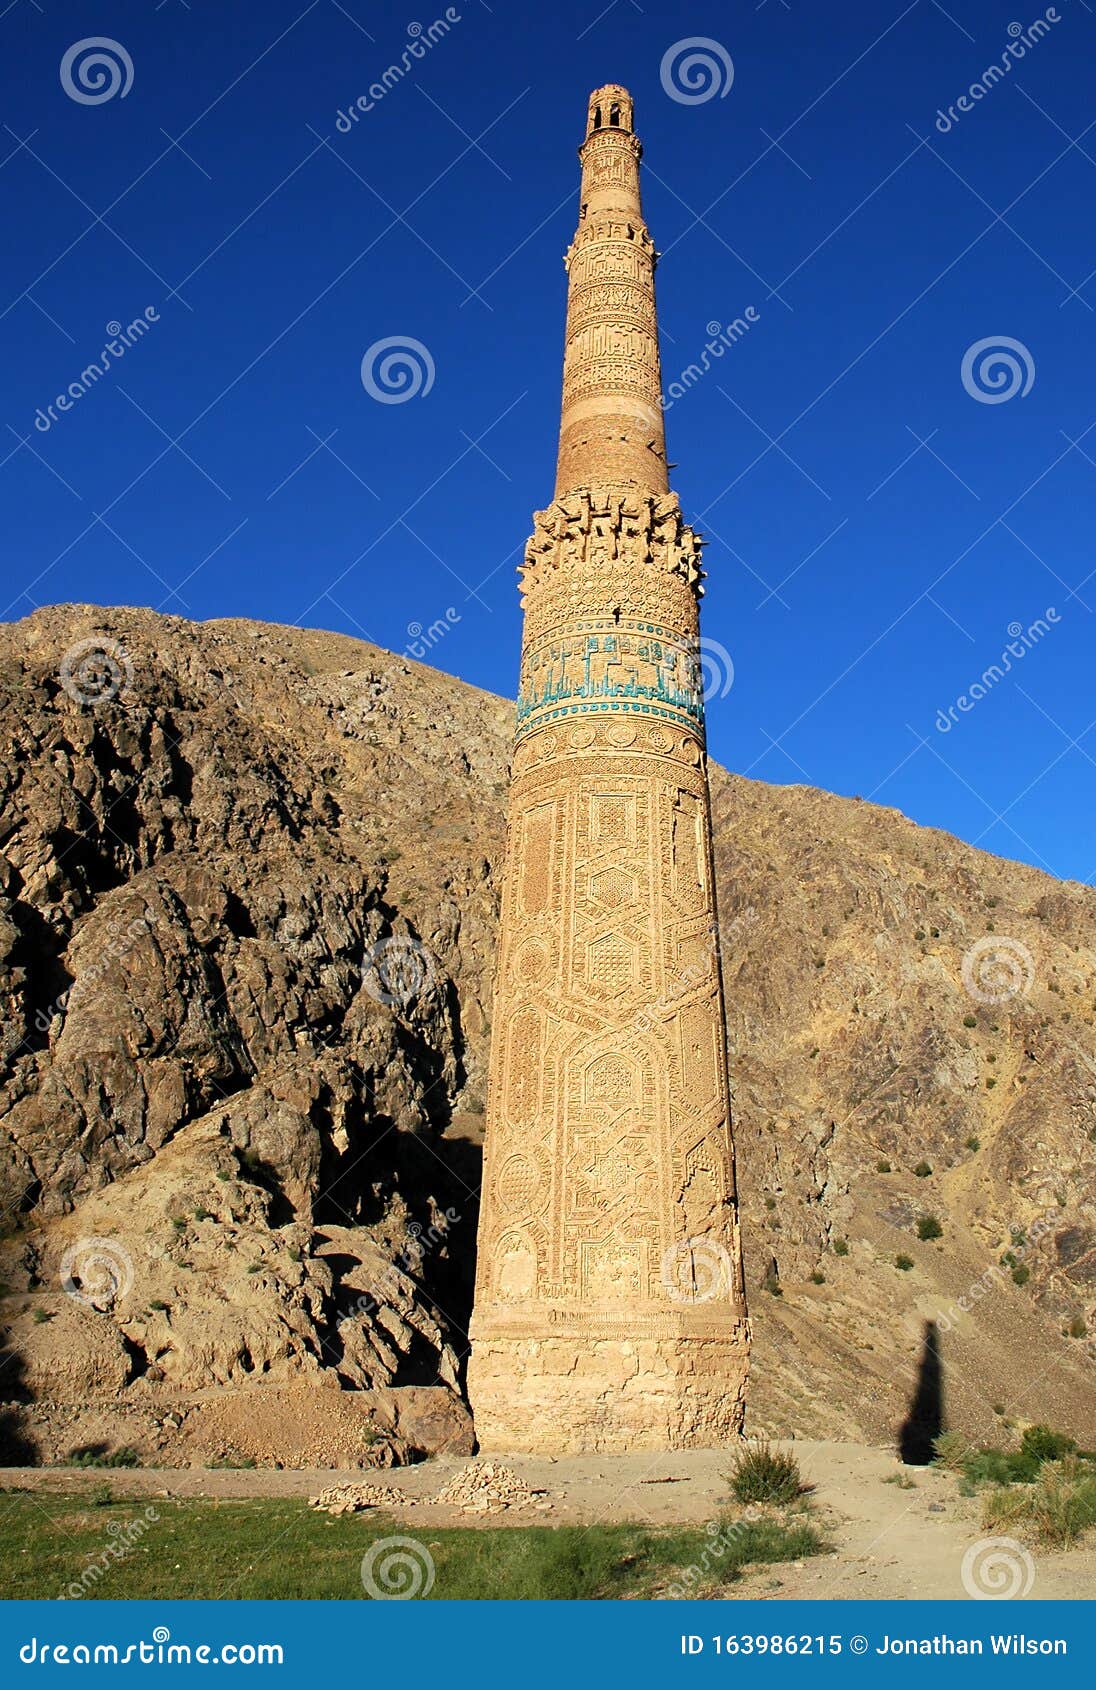 the minaret of jam, a unesco site in central afghanistan